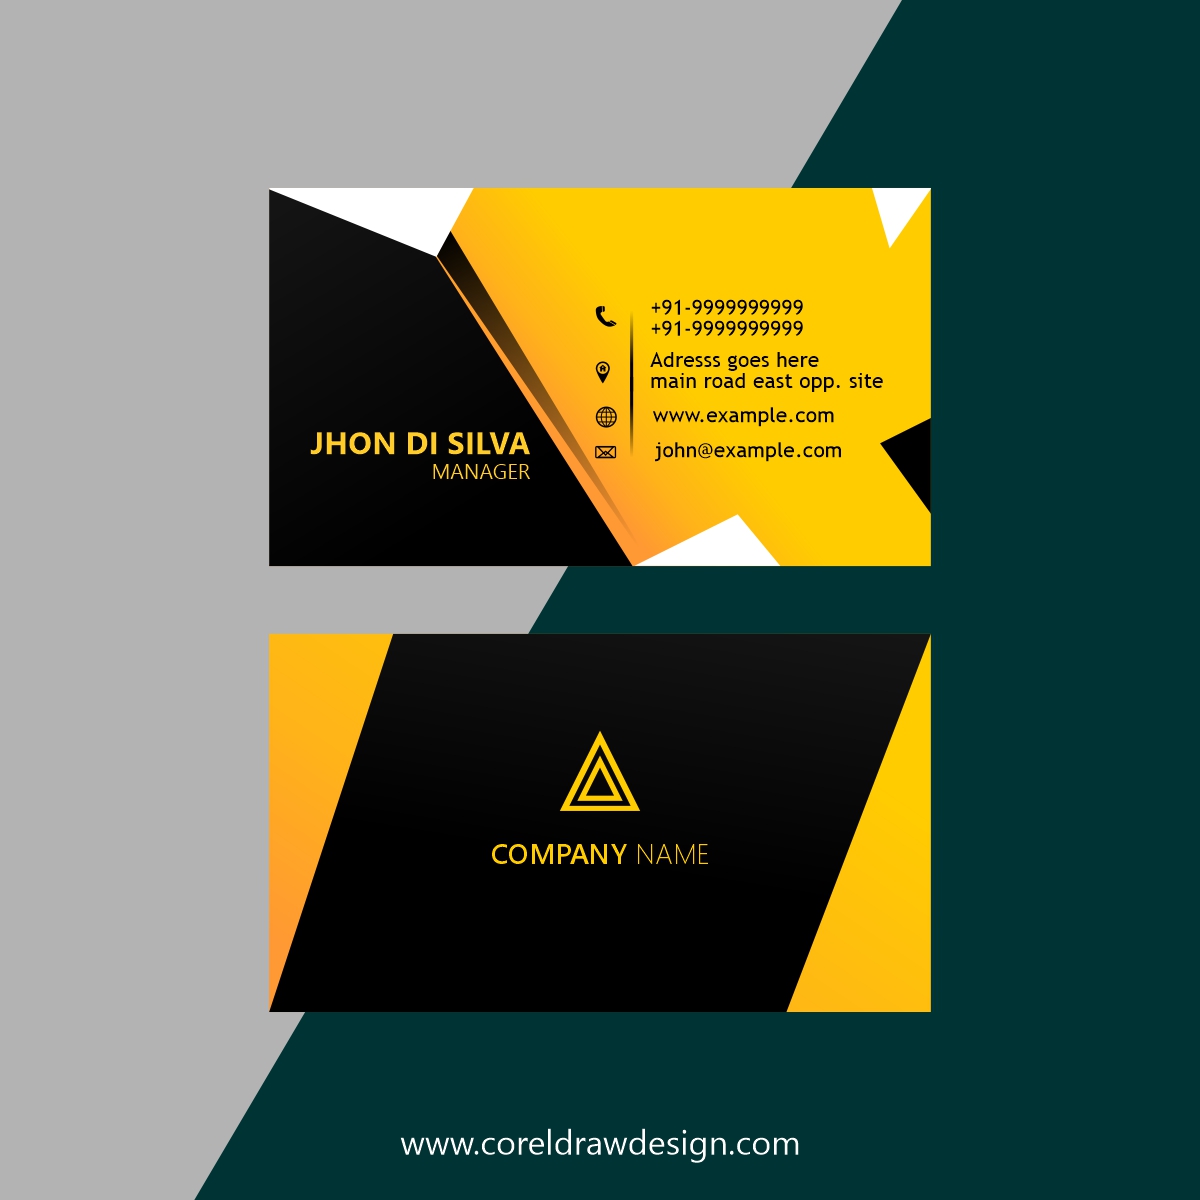 Coreldraw Business Cards Images For Visiting Card Templates Psd Free Download